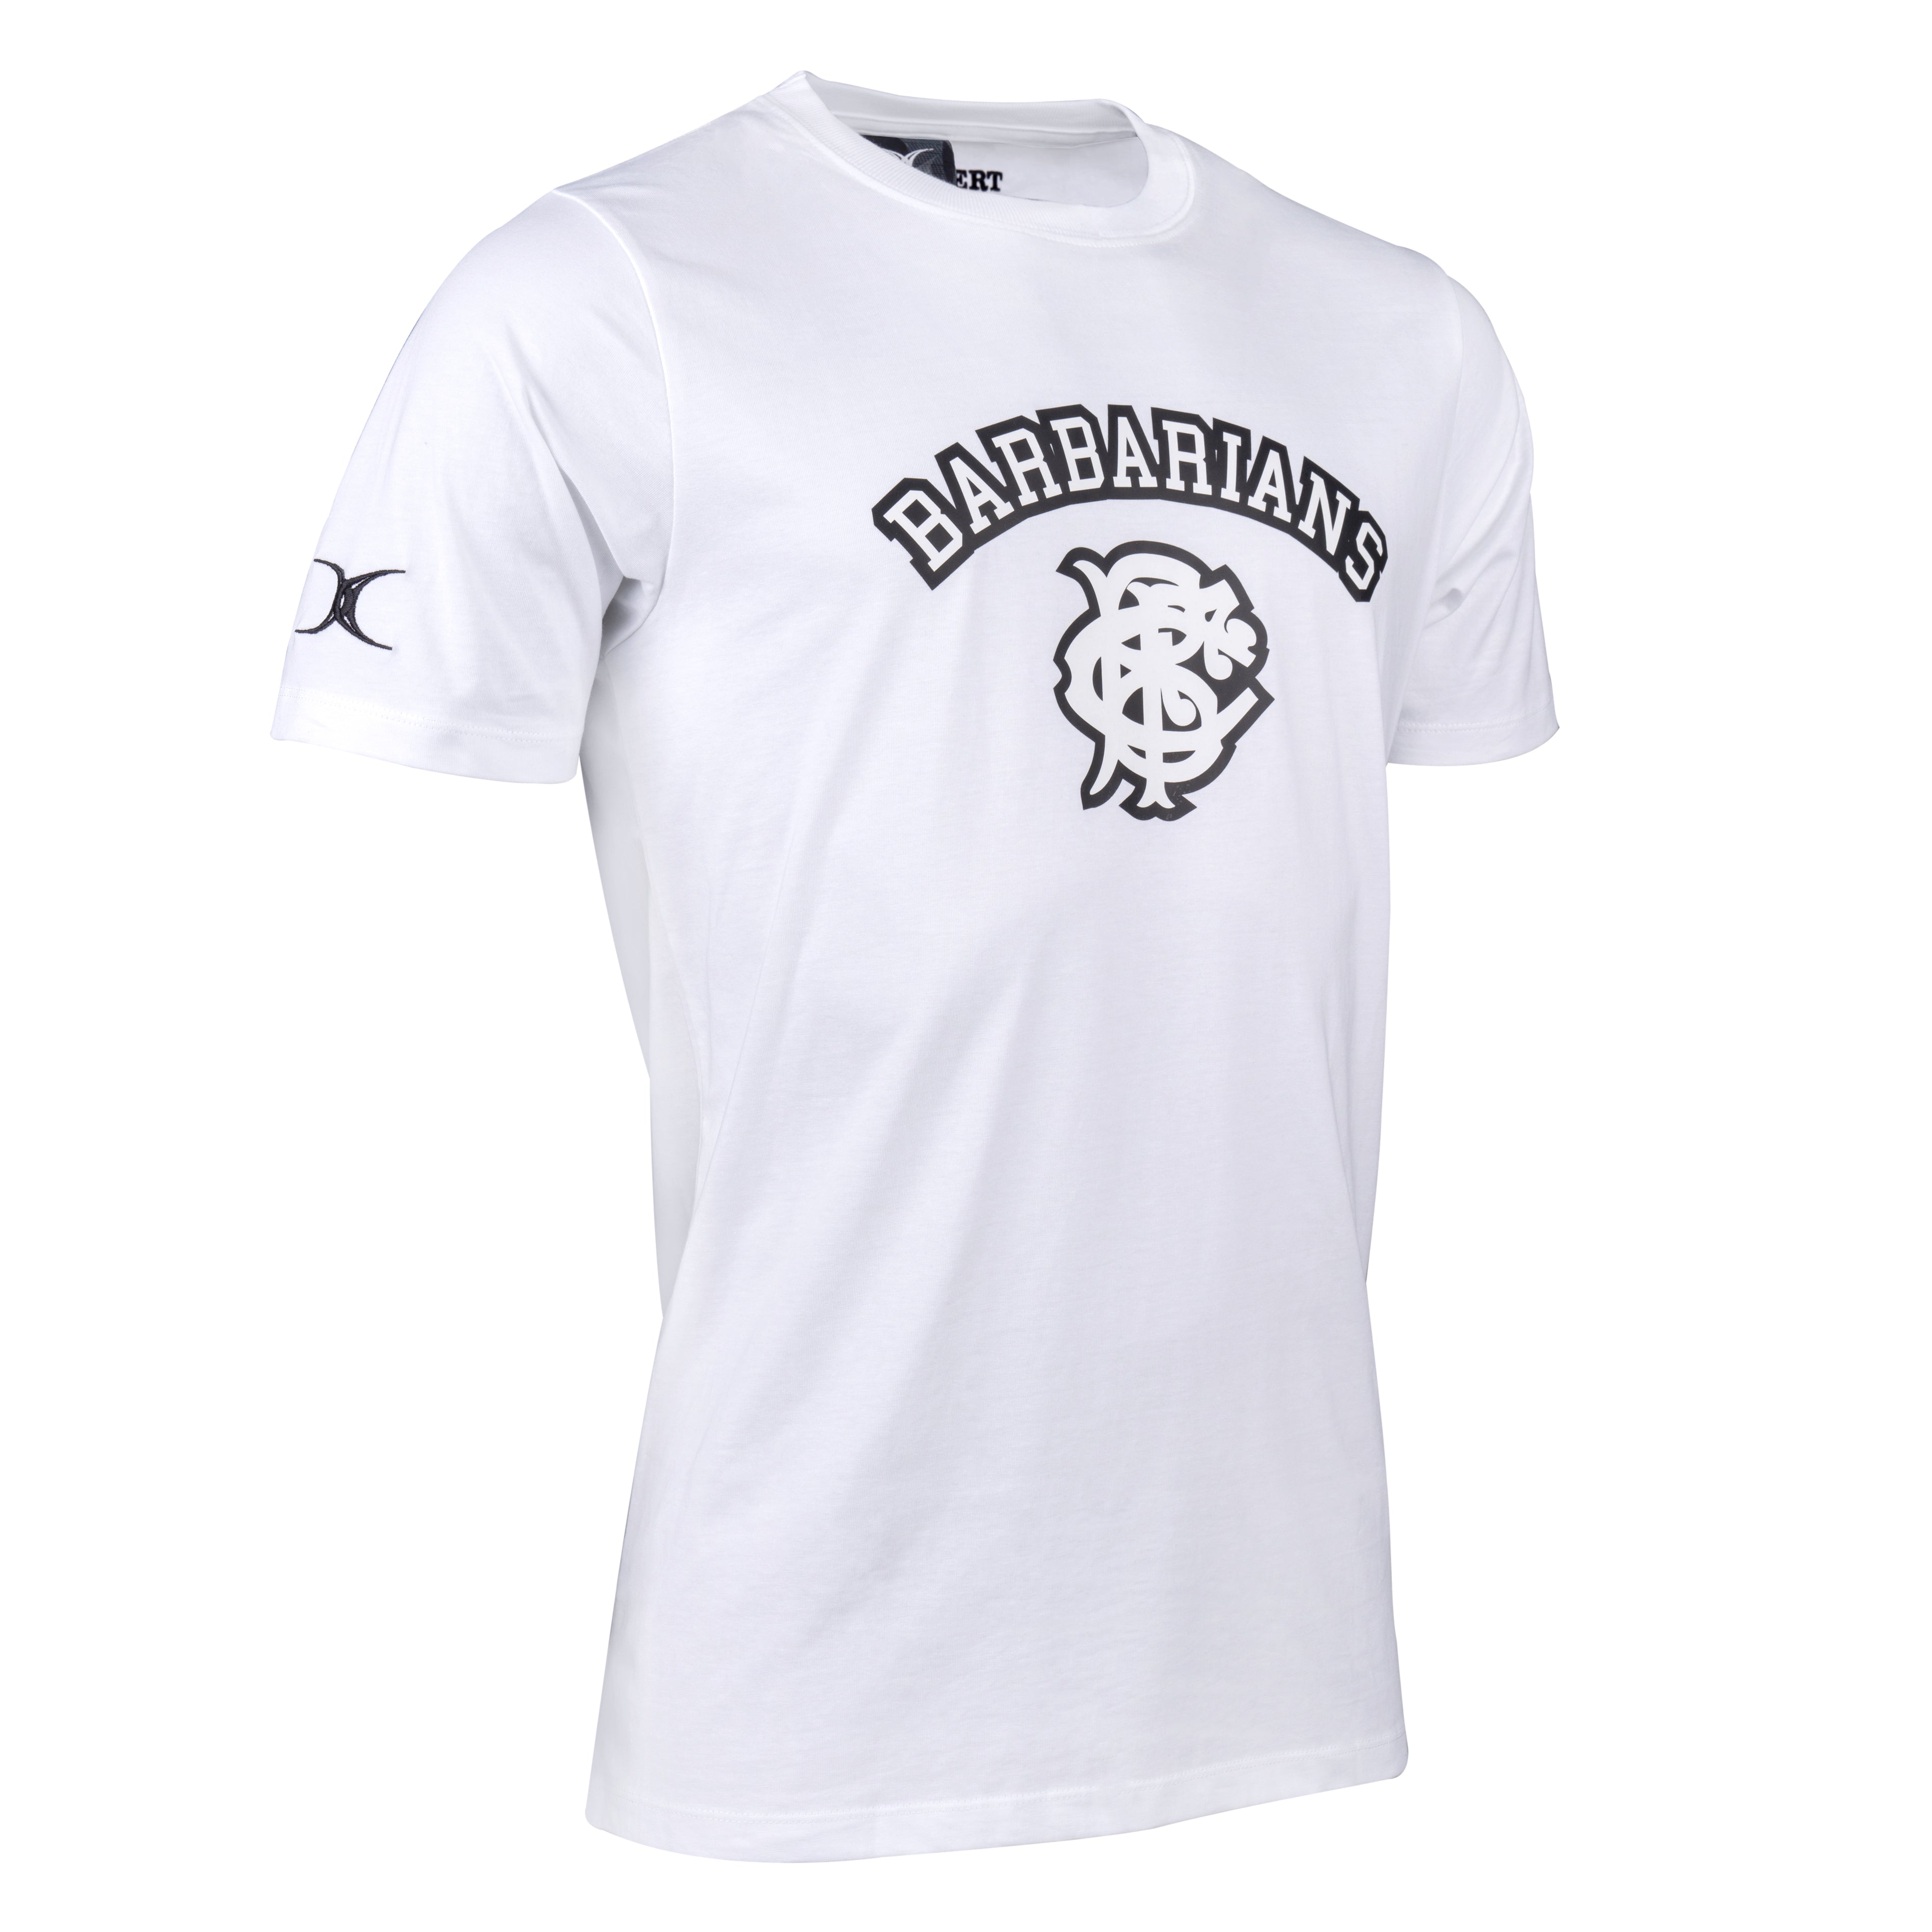 Barbarian FC Rugby Tee - White - Junior